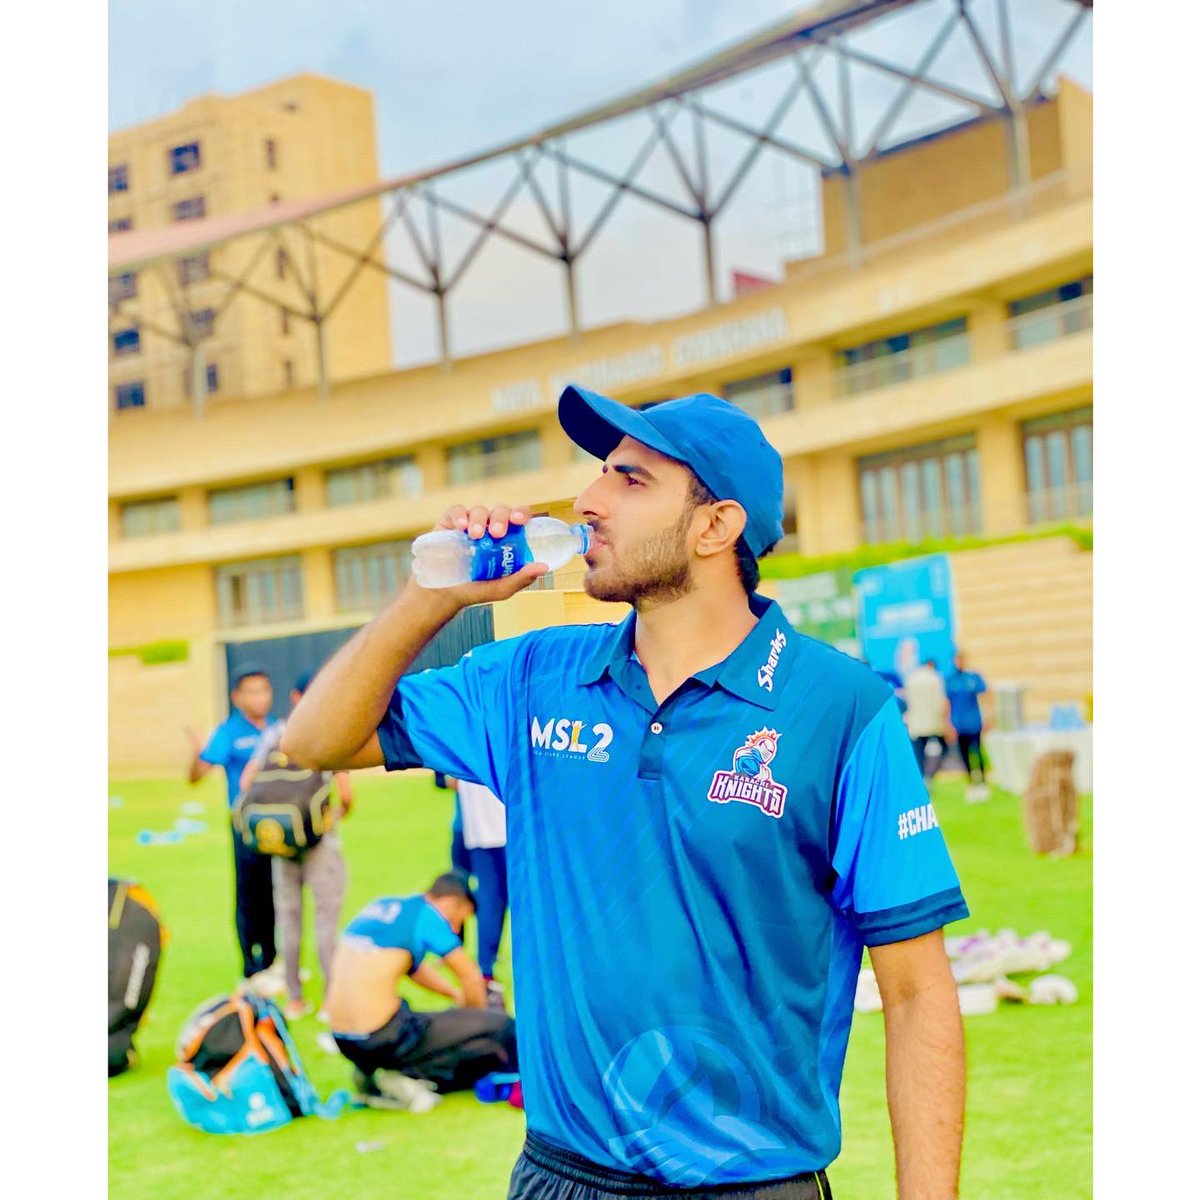 You should do for them who told you're failer🔥

#MSL #MSL2 #megastarsleague #emergingplayers #karachiknights